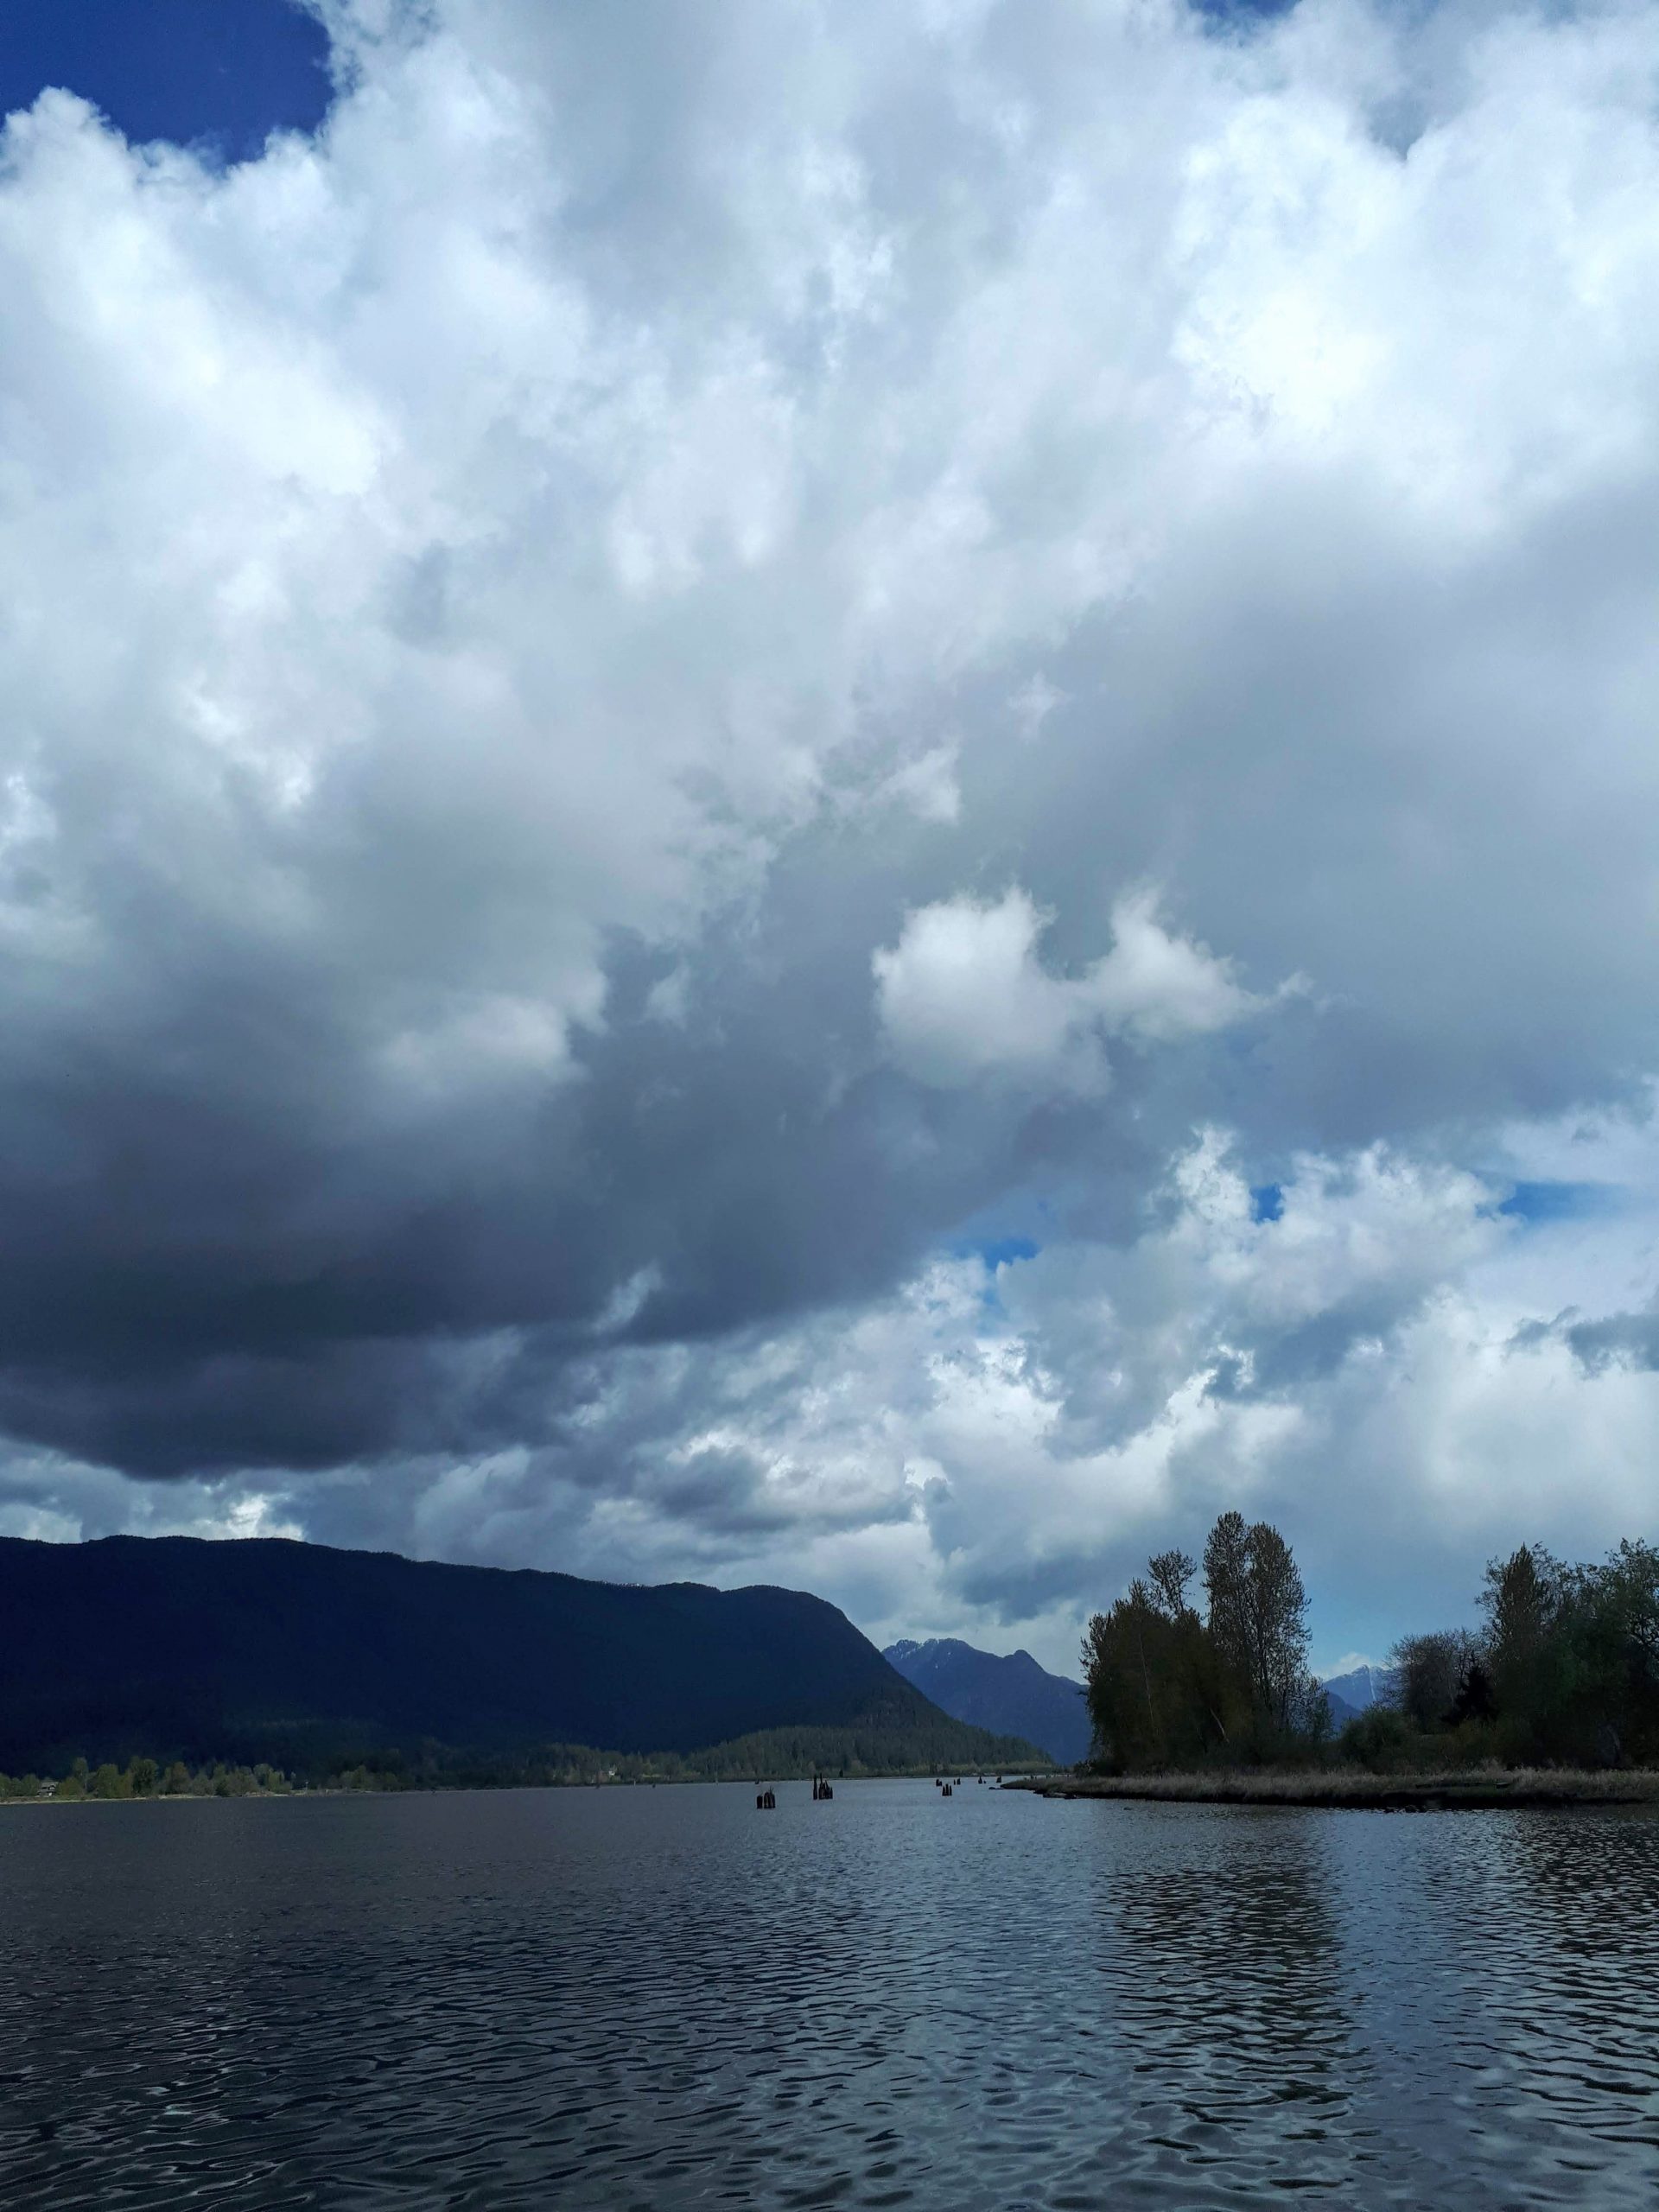 The view from the docks at the Pitt Meadows Marina